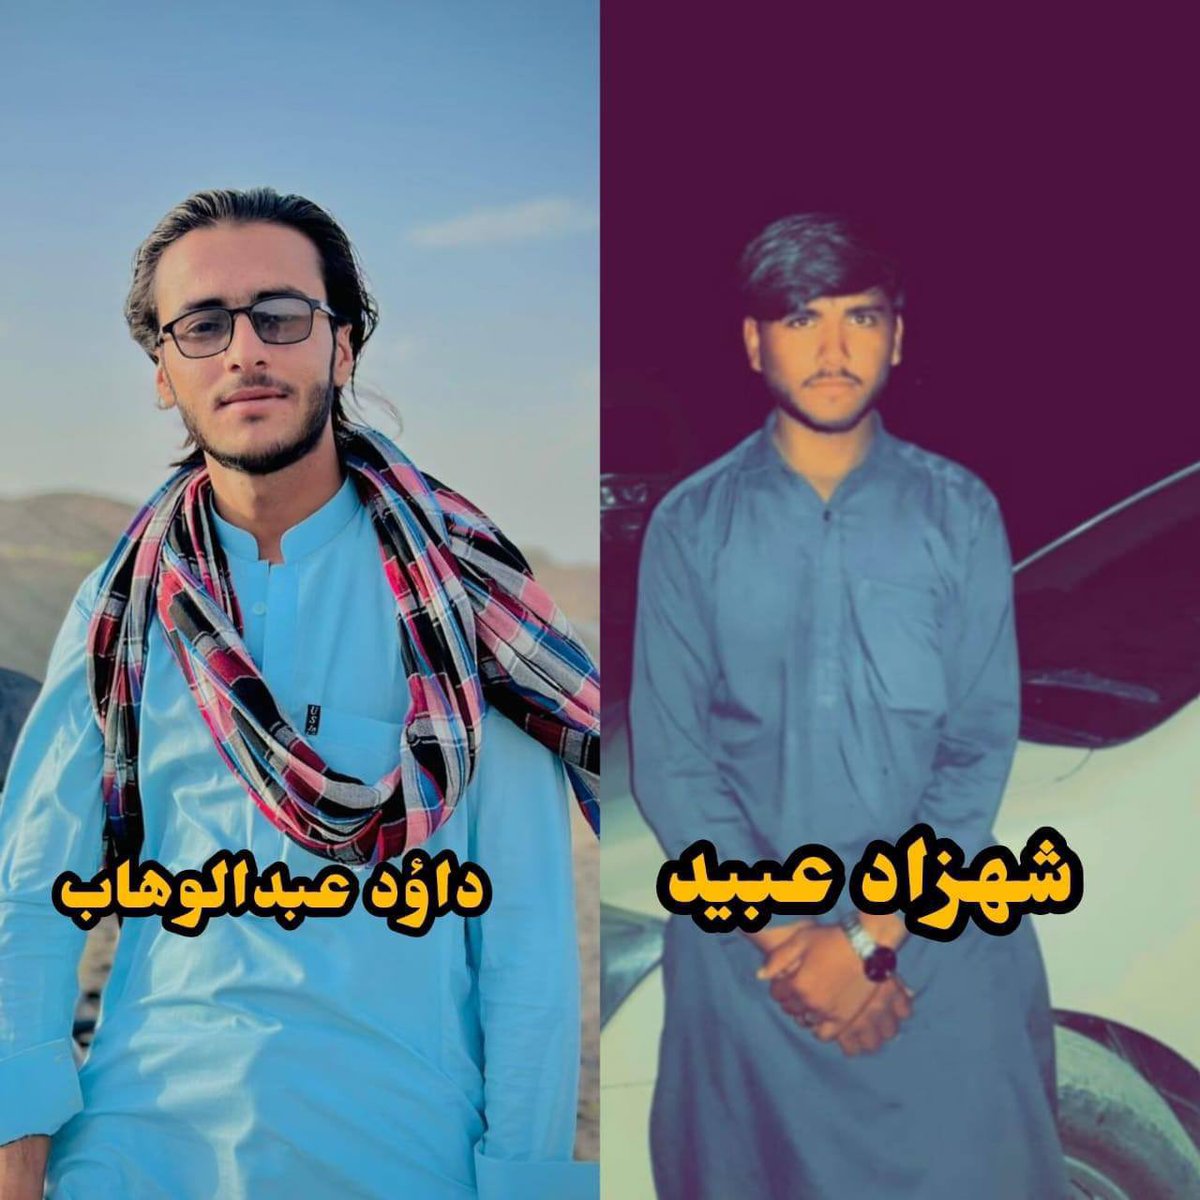 Pakistan has forcefully disappeared Dawood Baloch and Shehzad Baloch on May 2, 2024, from Newano Zamuran! We request everyone to be the voice of Dawood and Shehzad, who are innocent. We demand their immediate release! #ReleaseDawoodBaloch #ReleaseShehzadBaloch